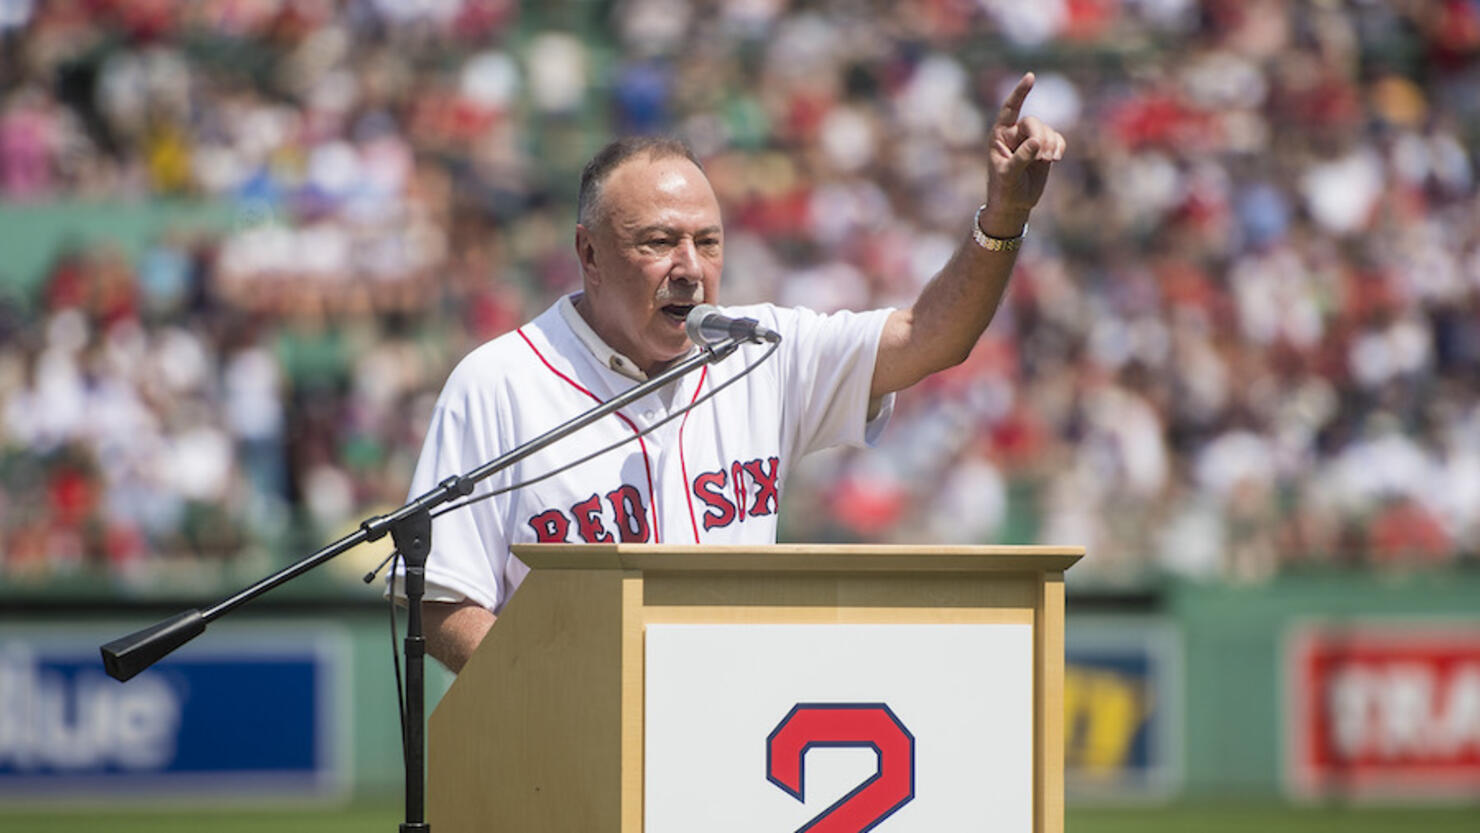 Red Sox players to wear commemorative patch in tribute to Jerry